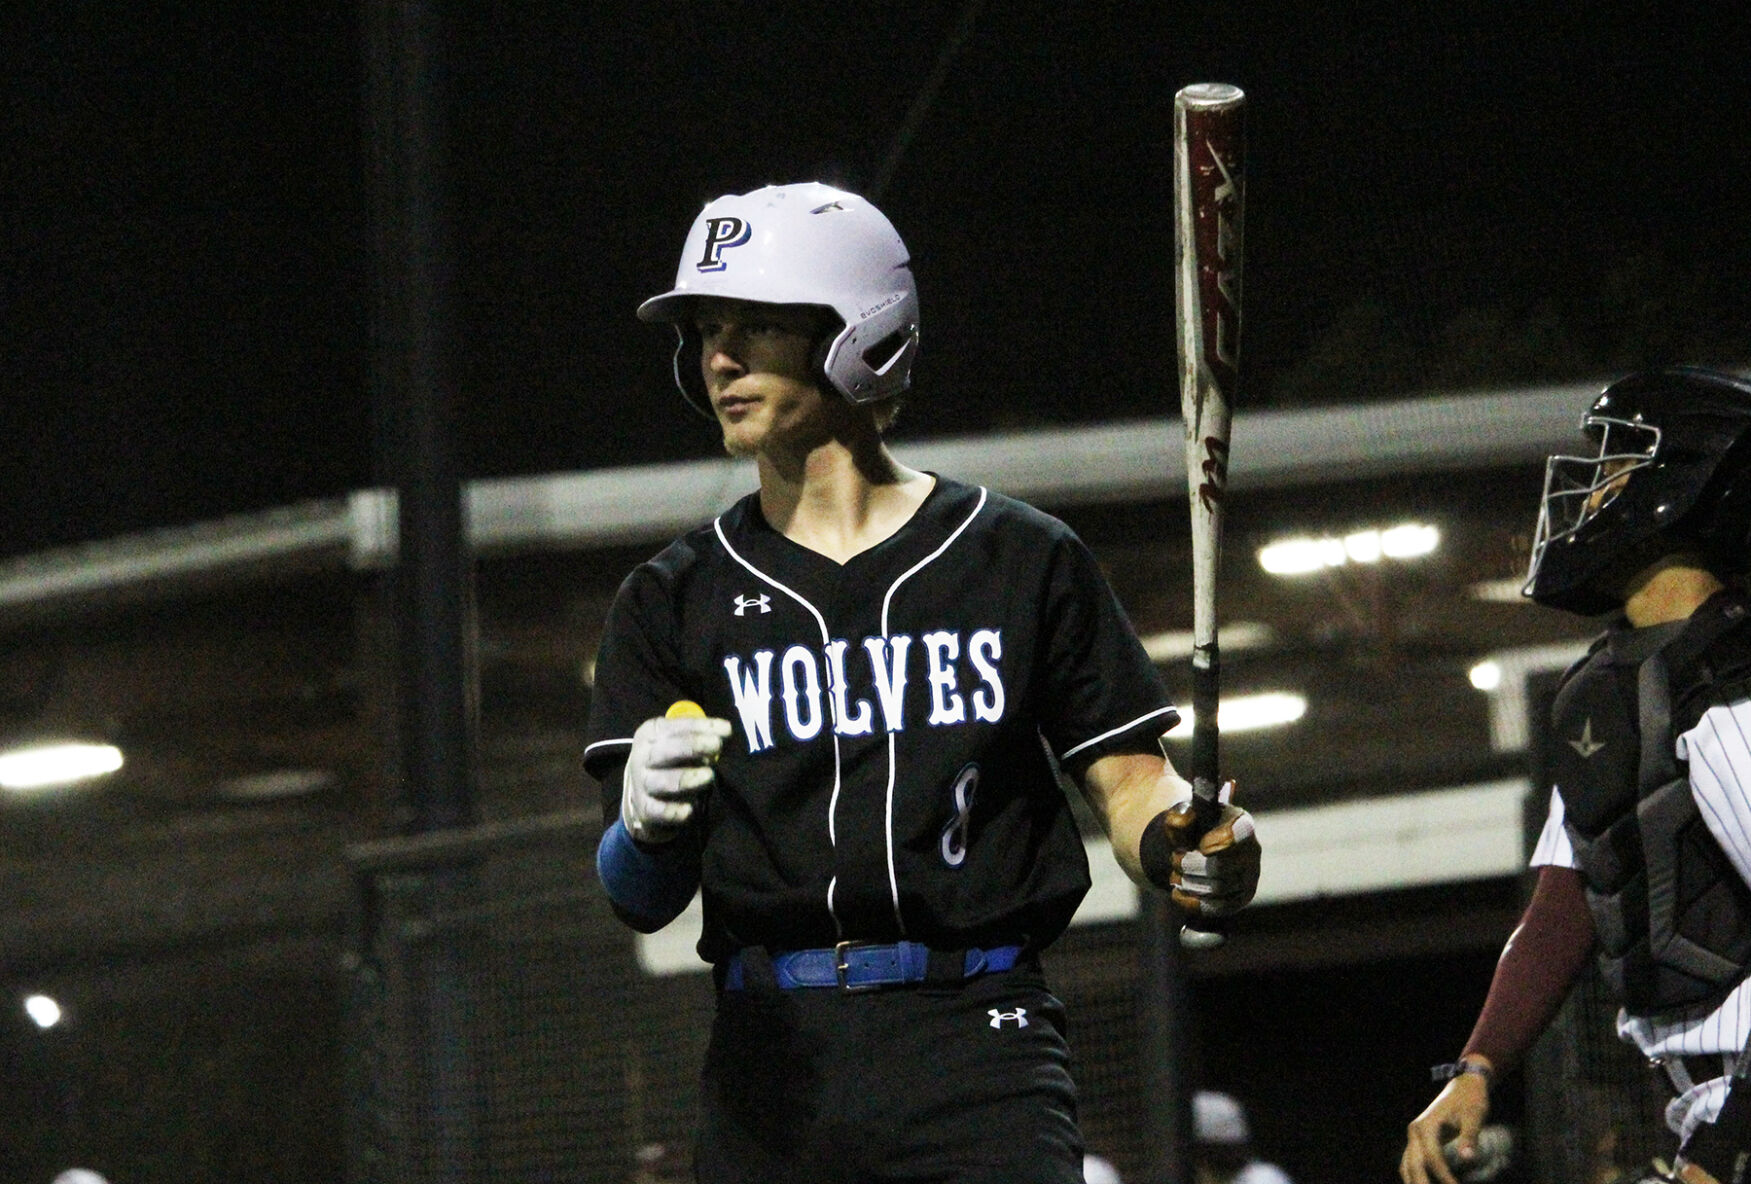 Collin County Baseball Roundup: Plano West rocks Marcus with 9-run inning; Celina stays perfect in 11-4A